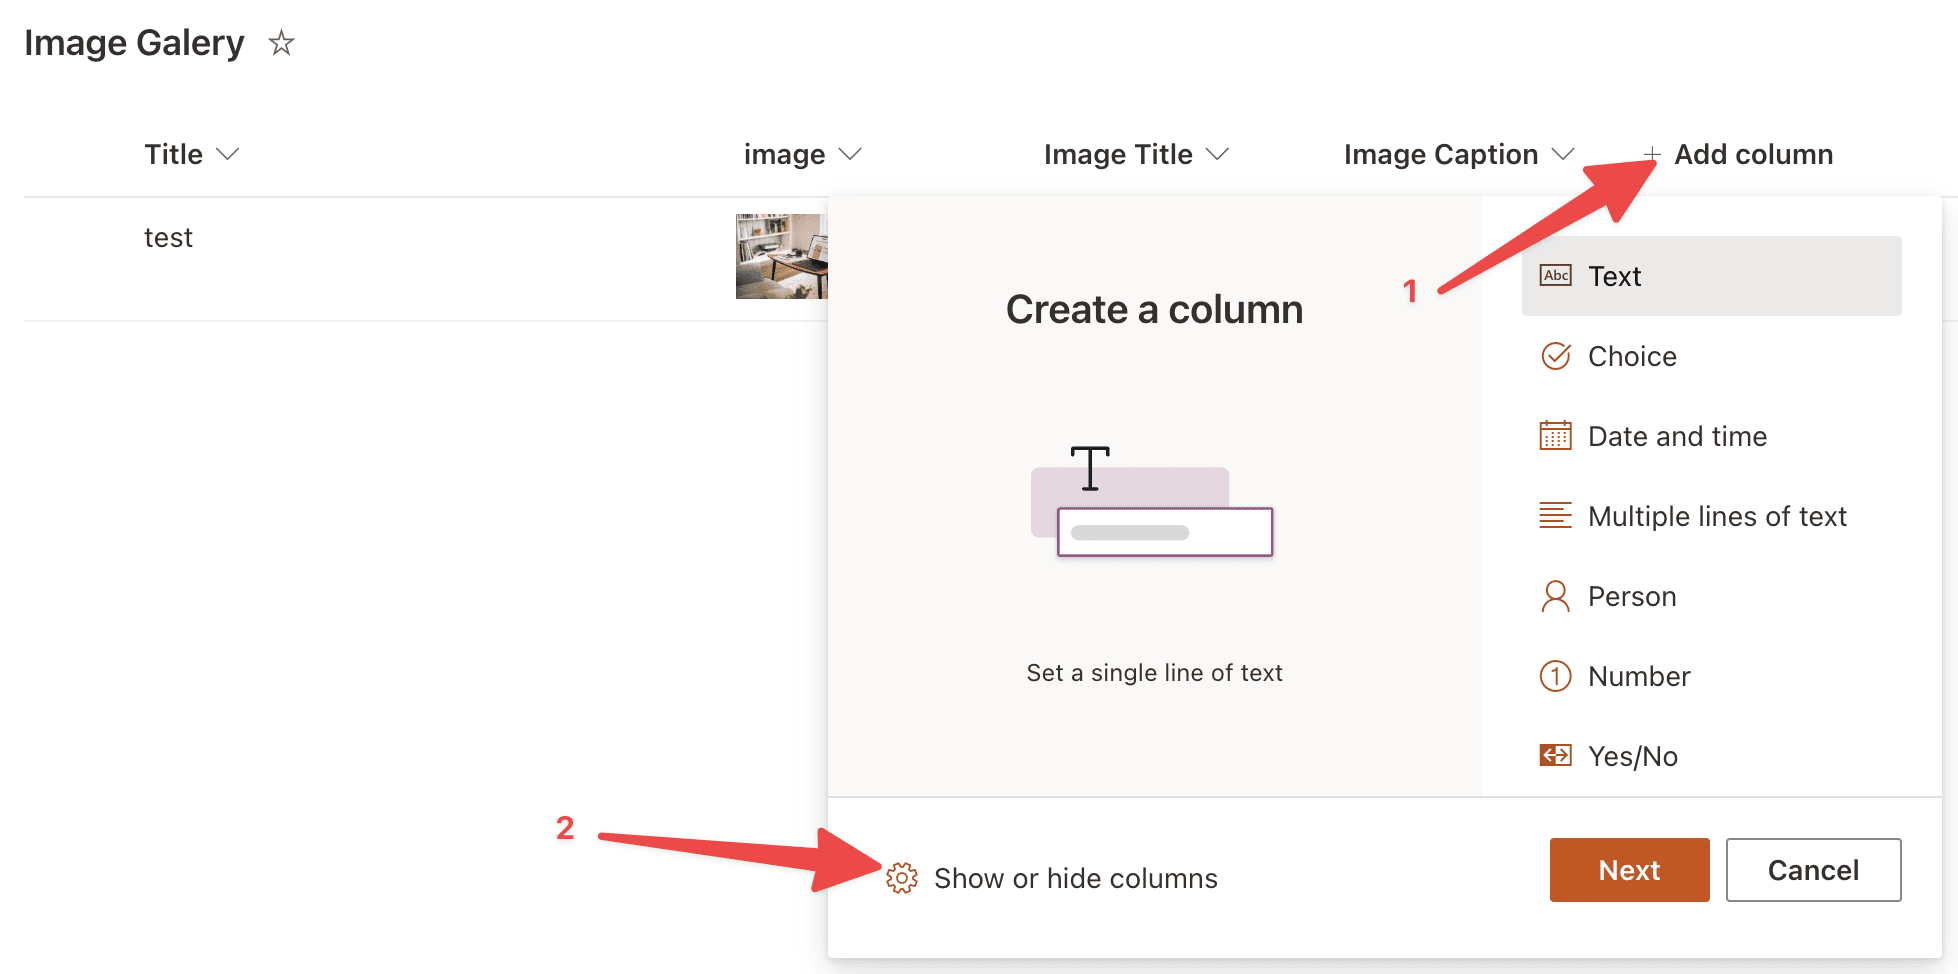 How to show and hide columns in SharePoint